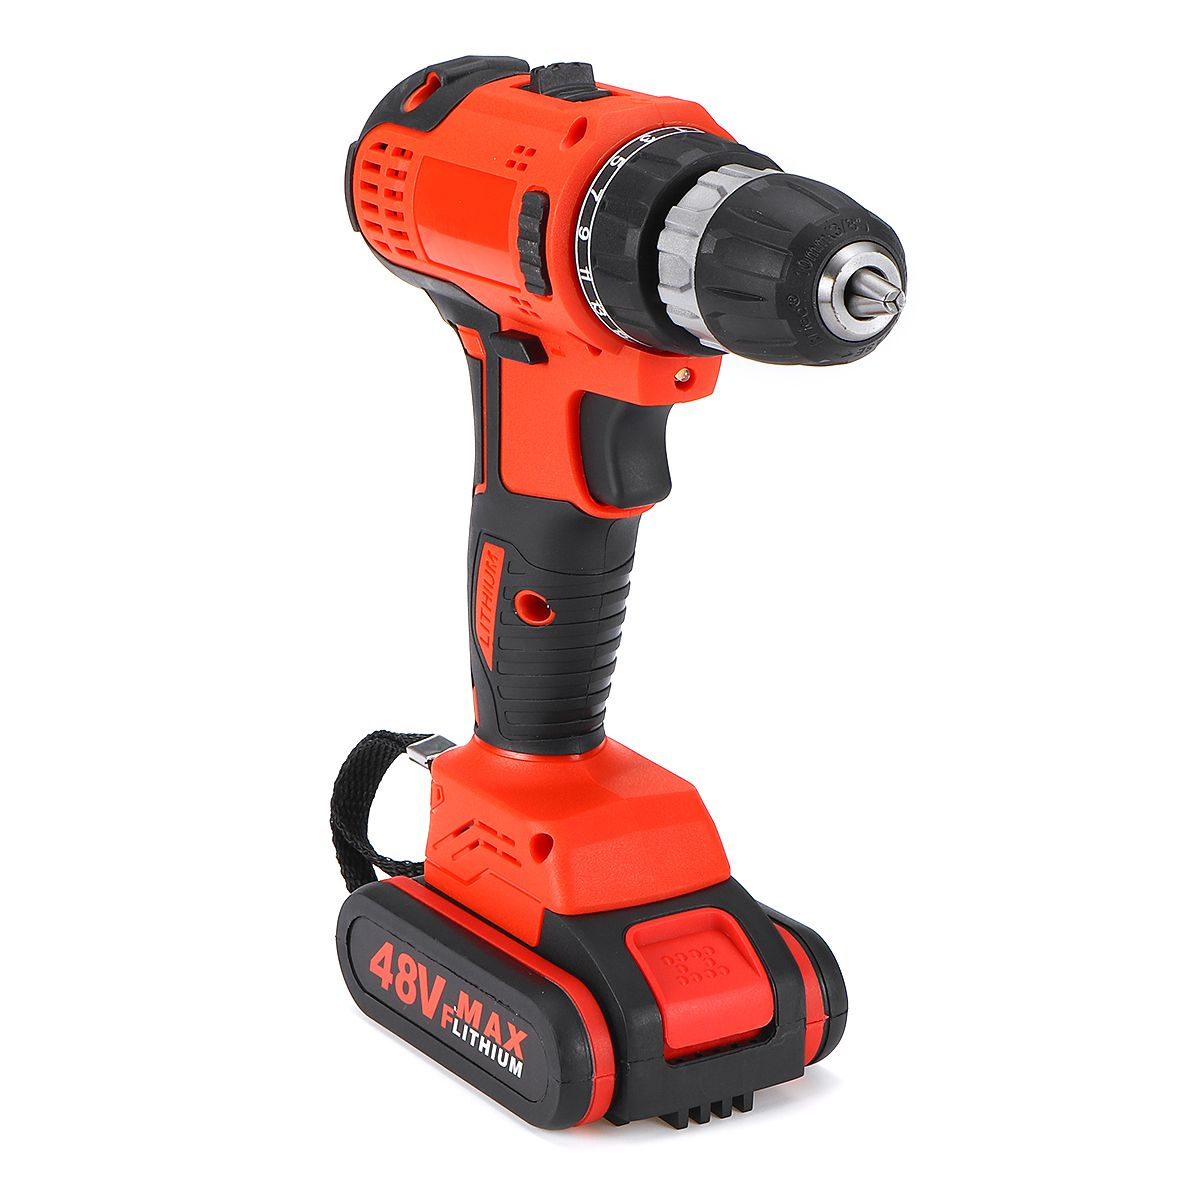 48VF-2000mAh-Cordless-Rechargeable-Brushless-Electric-Drill-W-1or-2-Battery-1572479